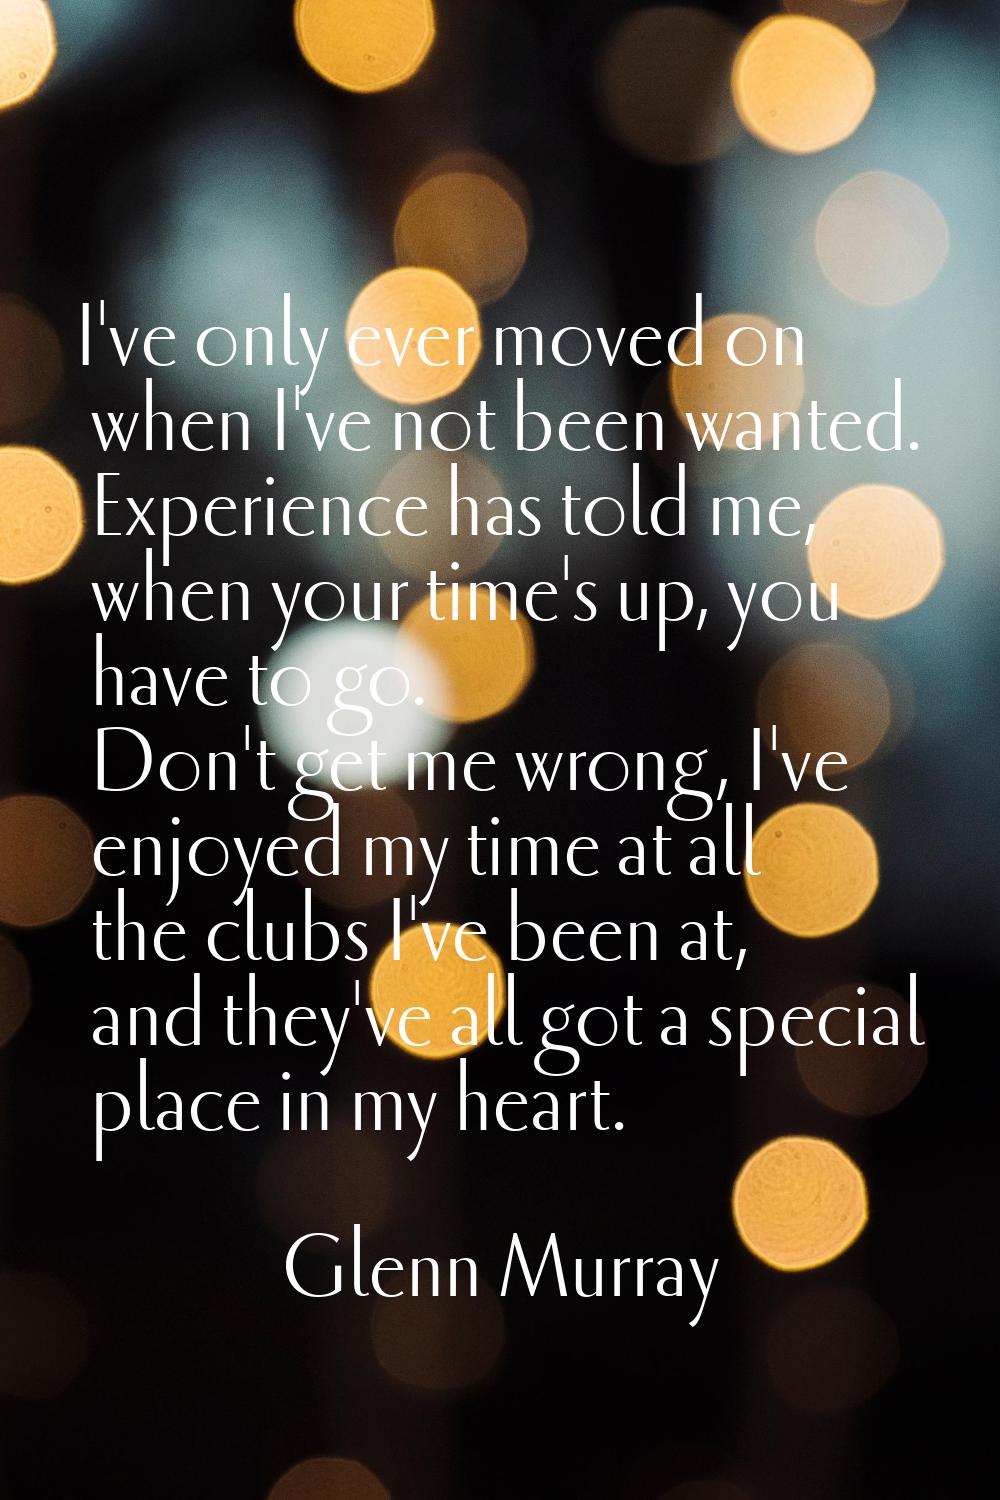 I've only ever moved on when I've not been wanted. Experience has told me, when your time's up, you